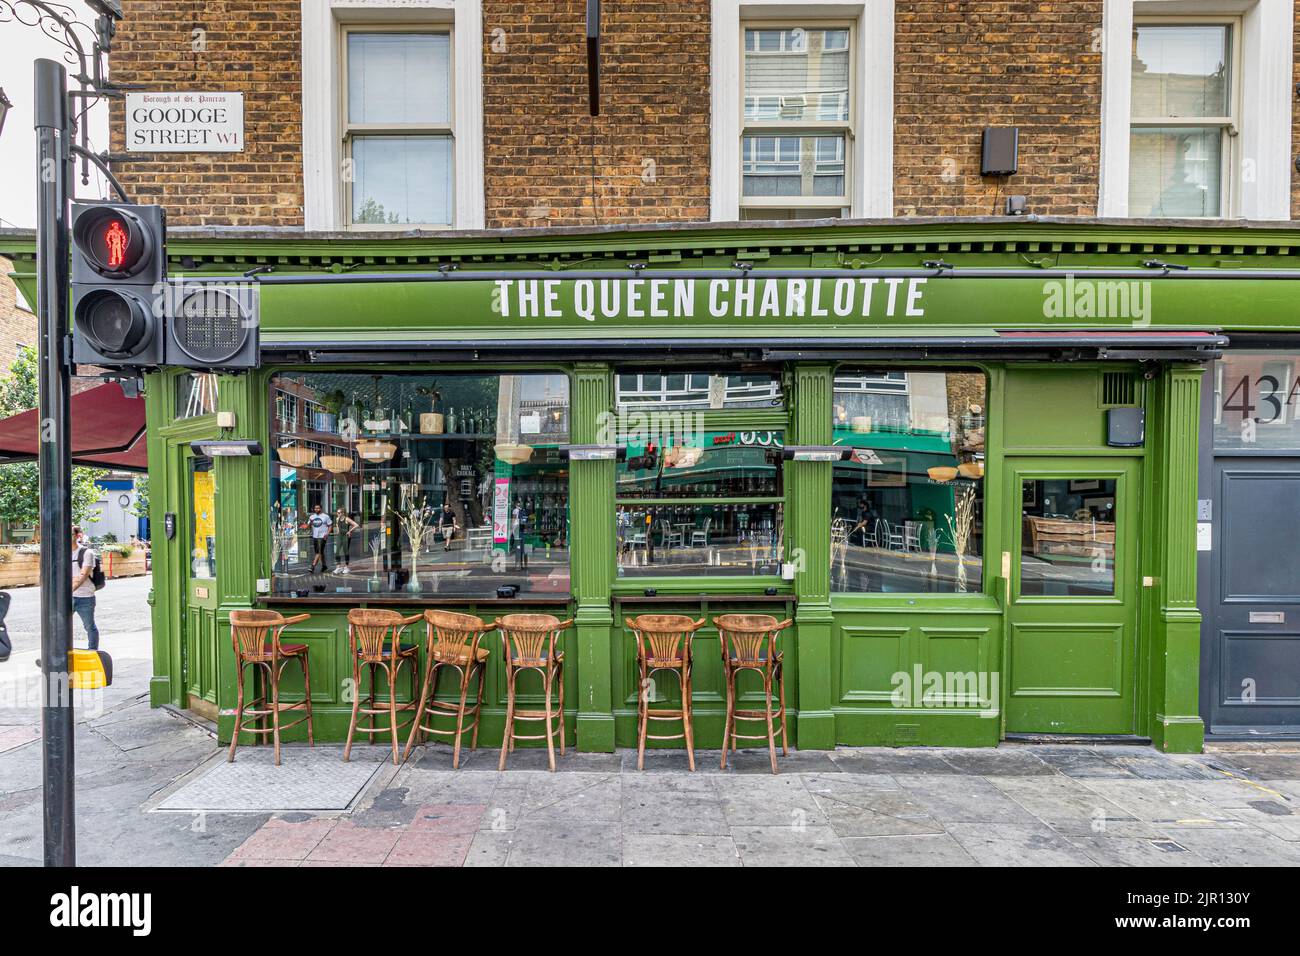 The Queen Charlotte is a Brewdog draft pub located on the corner of Goodge street and Charlotte Street in the heart of Fitzrovia, London W1 Stock Photo